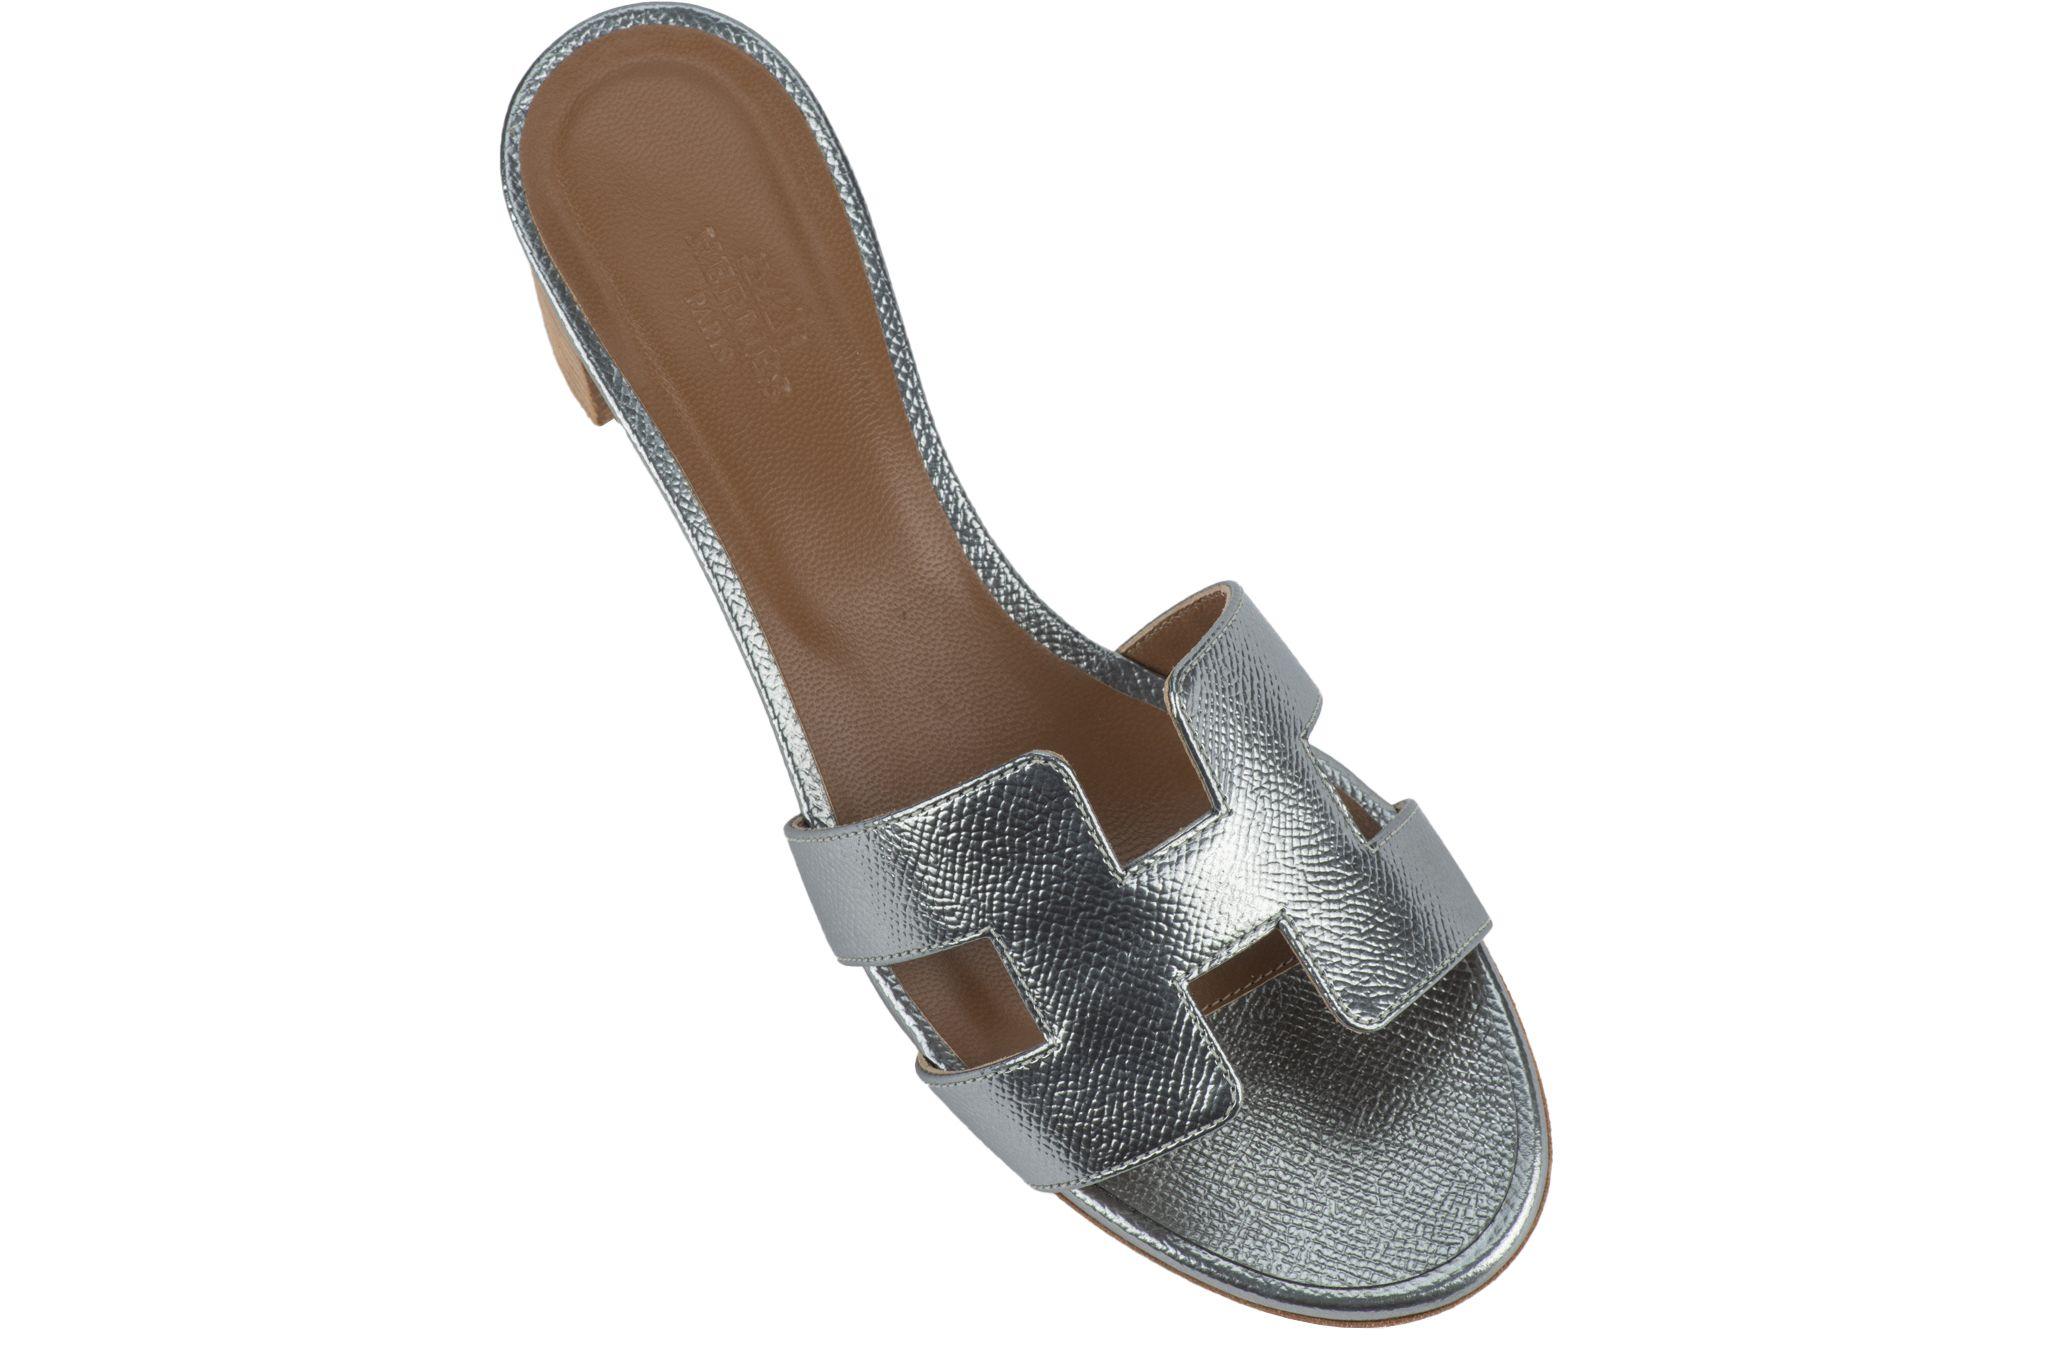 The Hermès Oasis Sandal in calfskin with iconic 